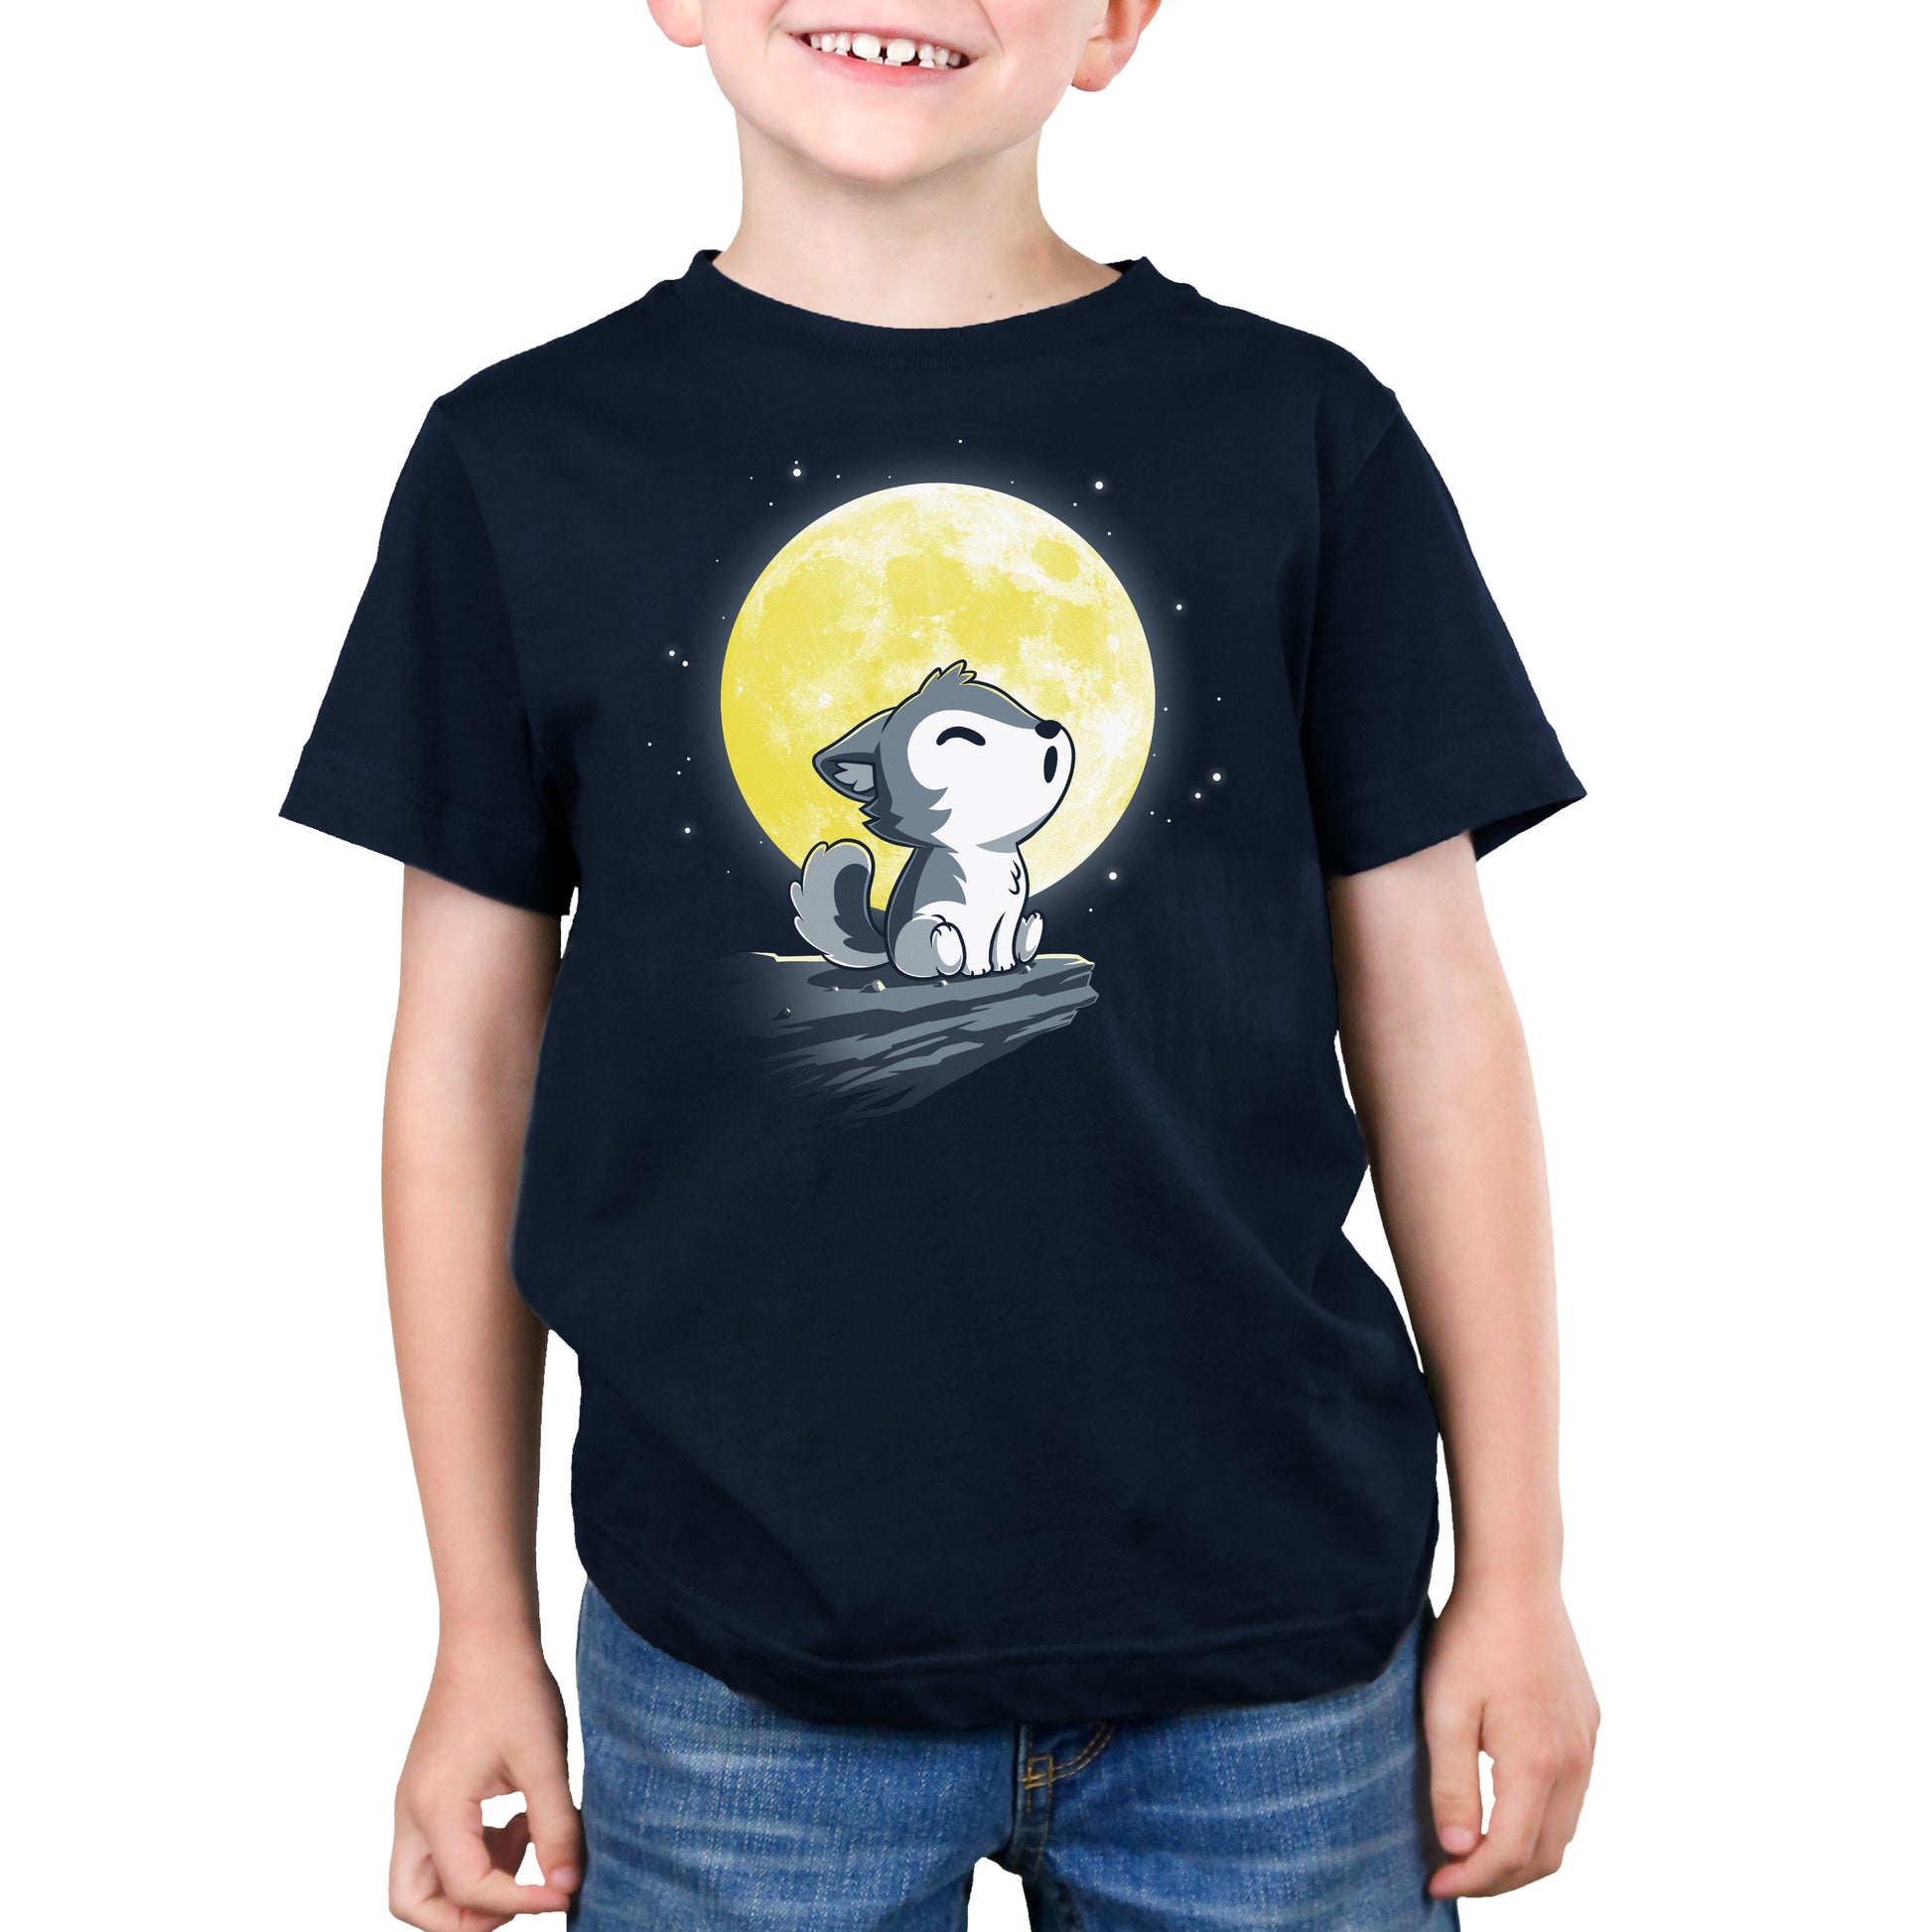 A young boy wearing a Lil' Werewolf t-shirt from TeeTurtle.